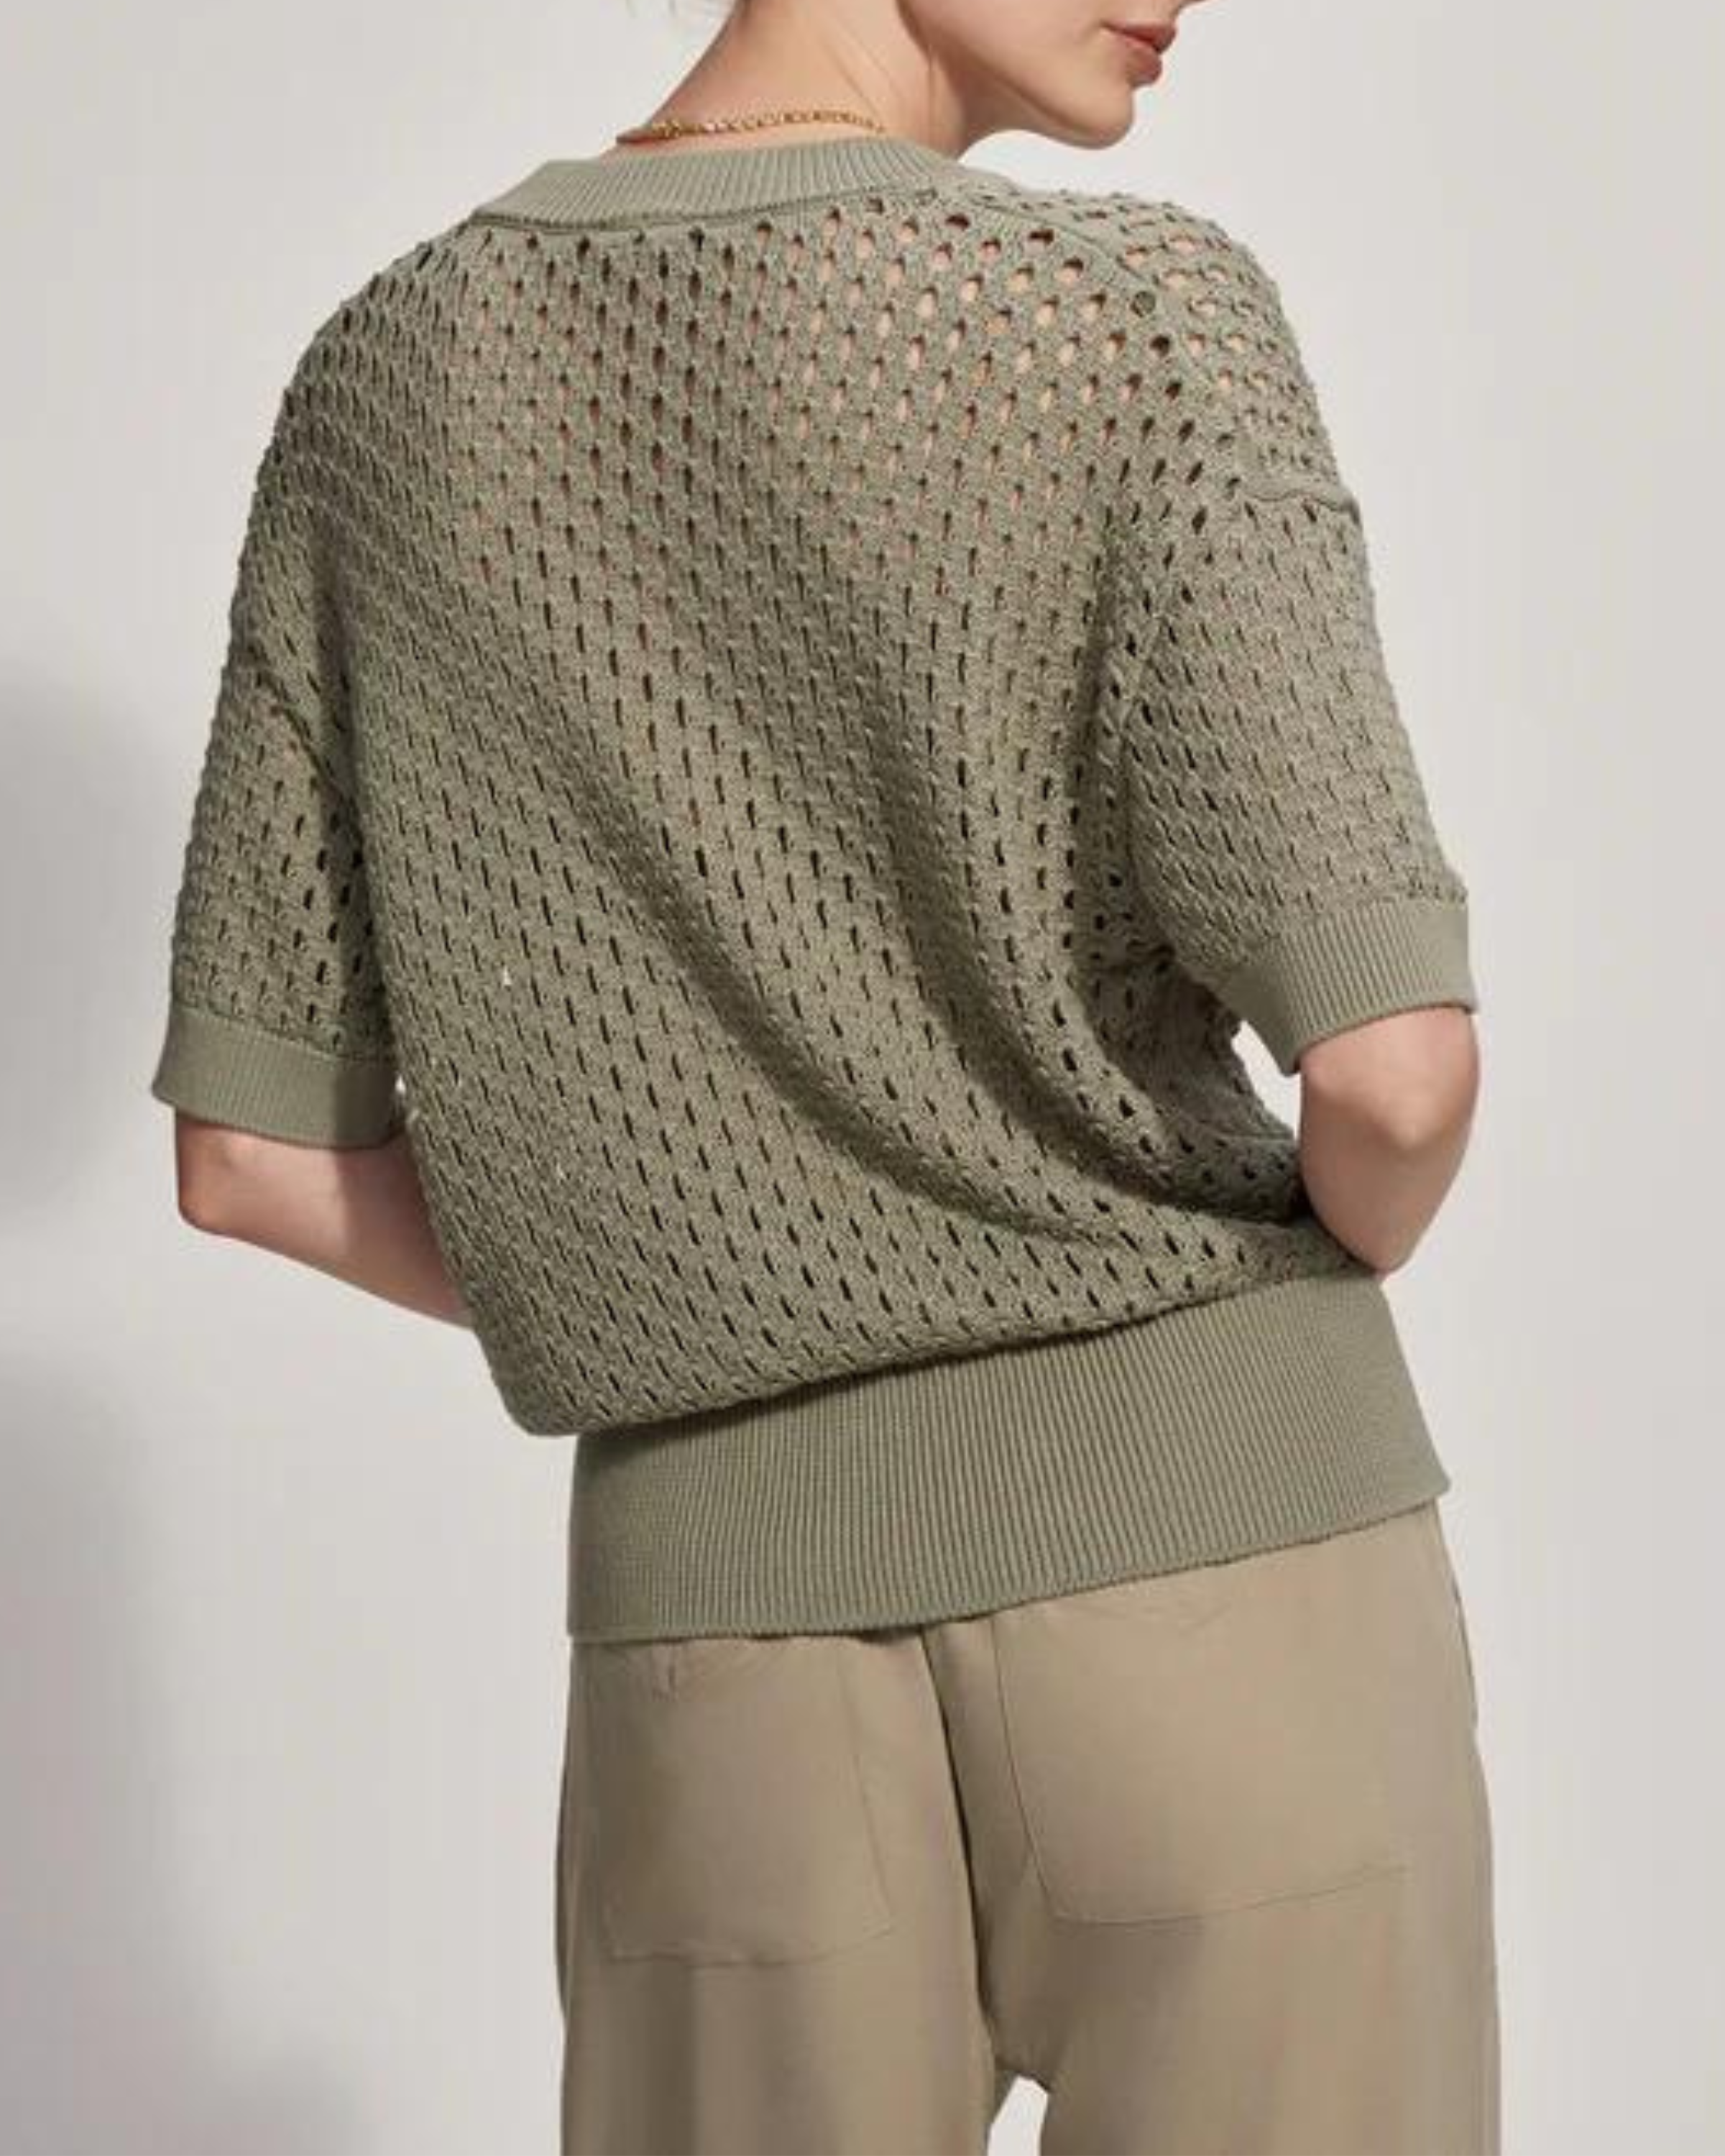 Varley Eaton Knit Top in Seagrass